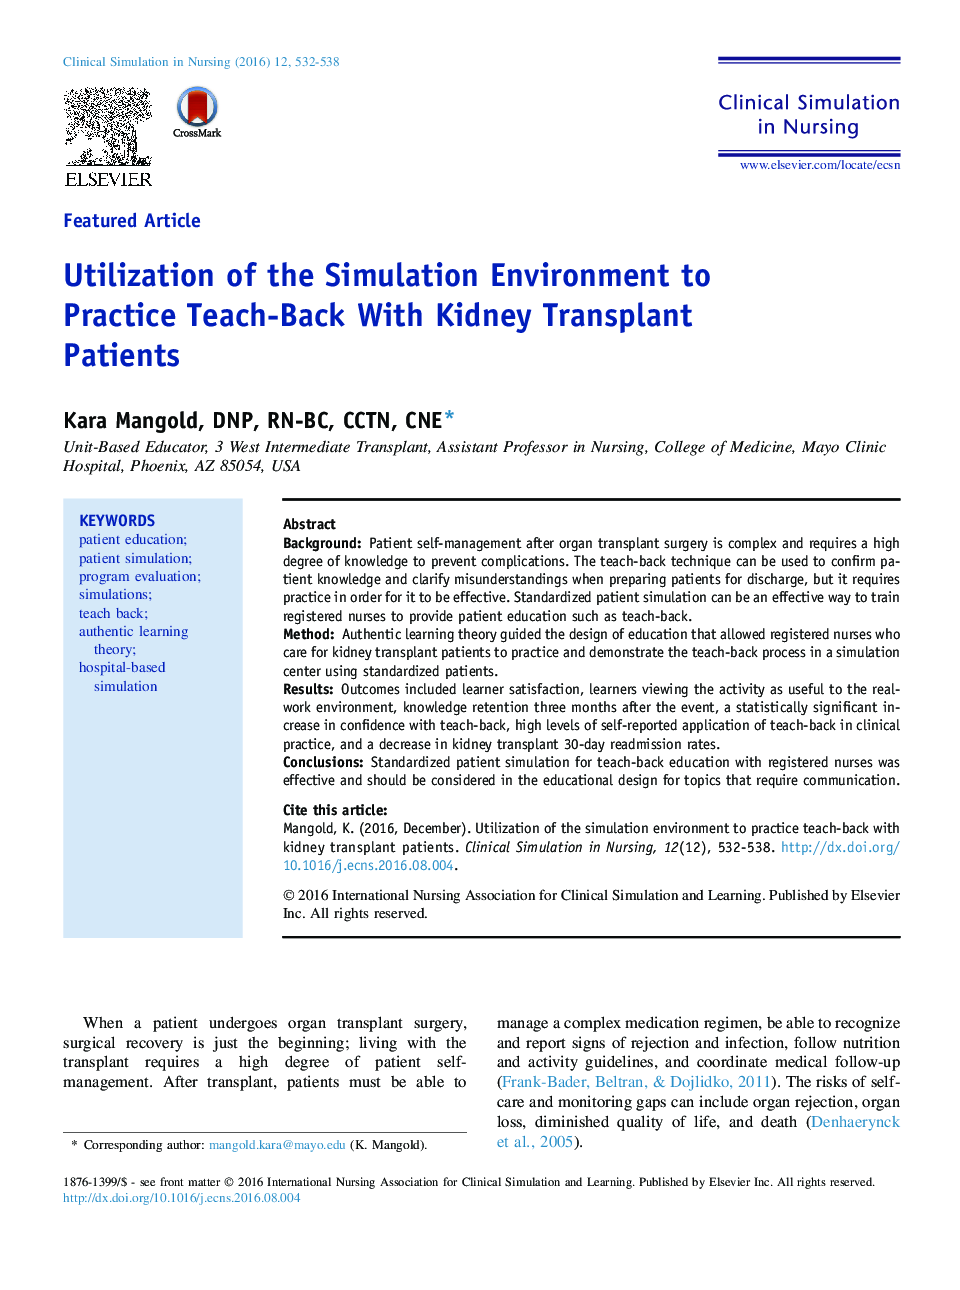 Utilization of the Simulation Environment to Practice Teach-Back With Kidney Transplant Patients